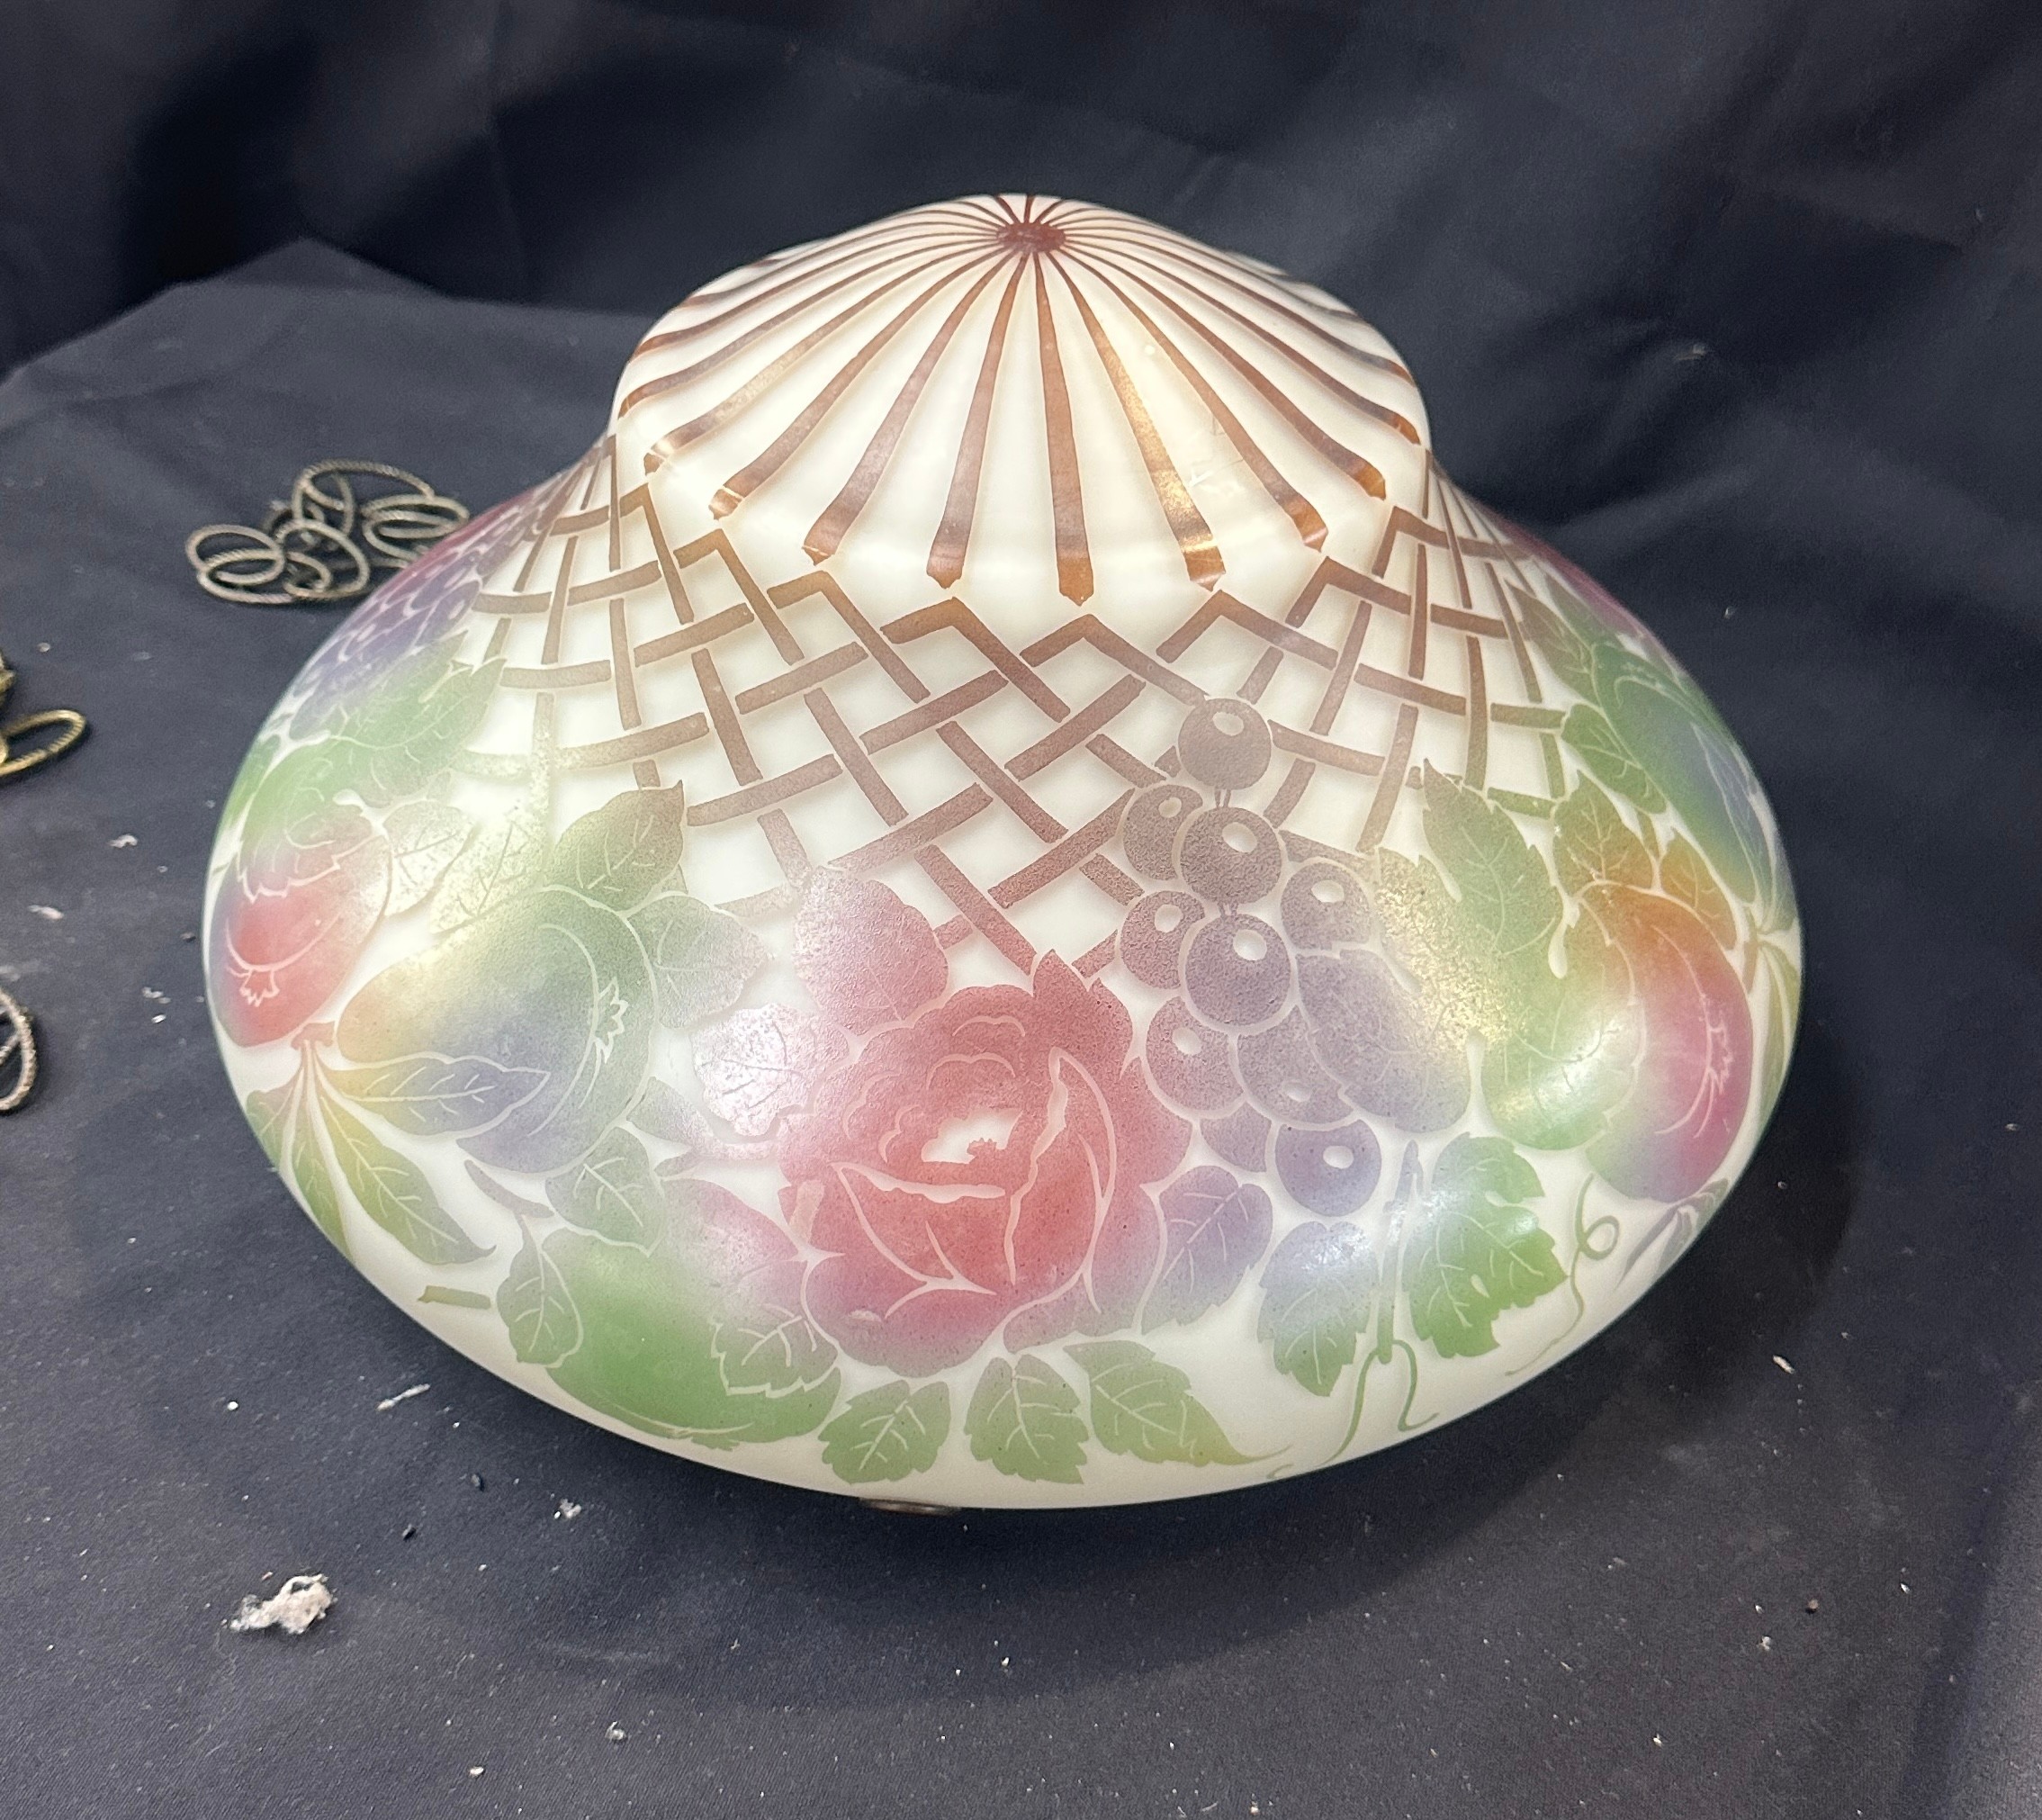 Signed Nancito french floral glass diffuser shade measures approx 40 inches diameter - Image 3 of 5